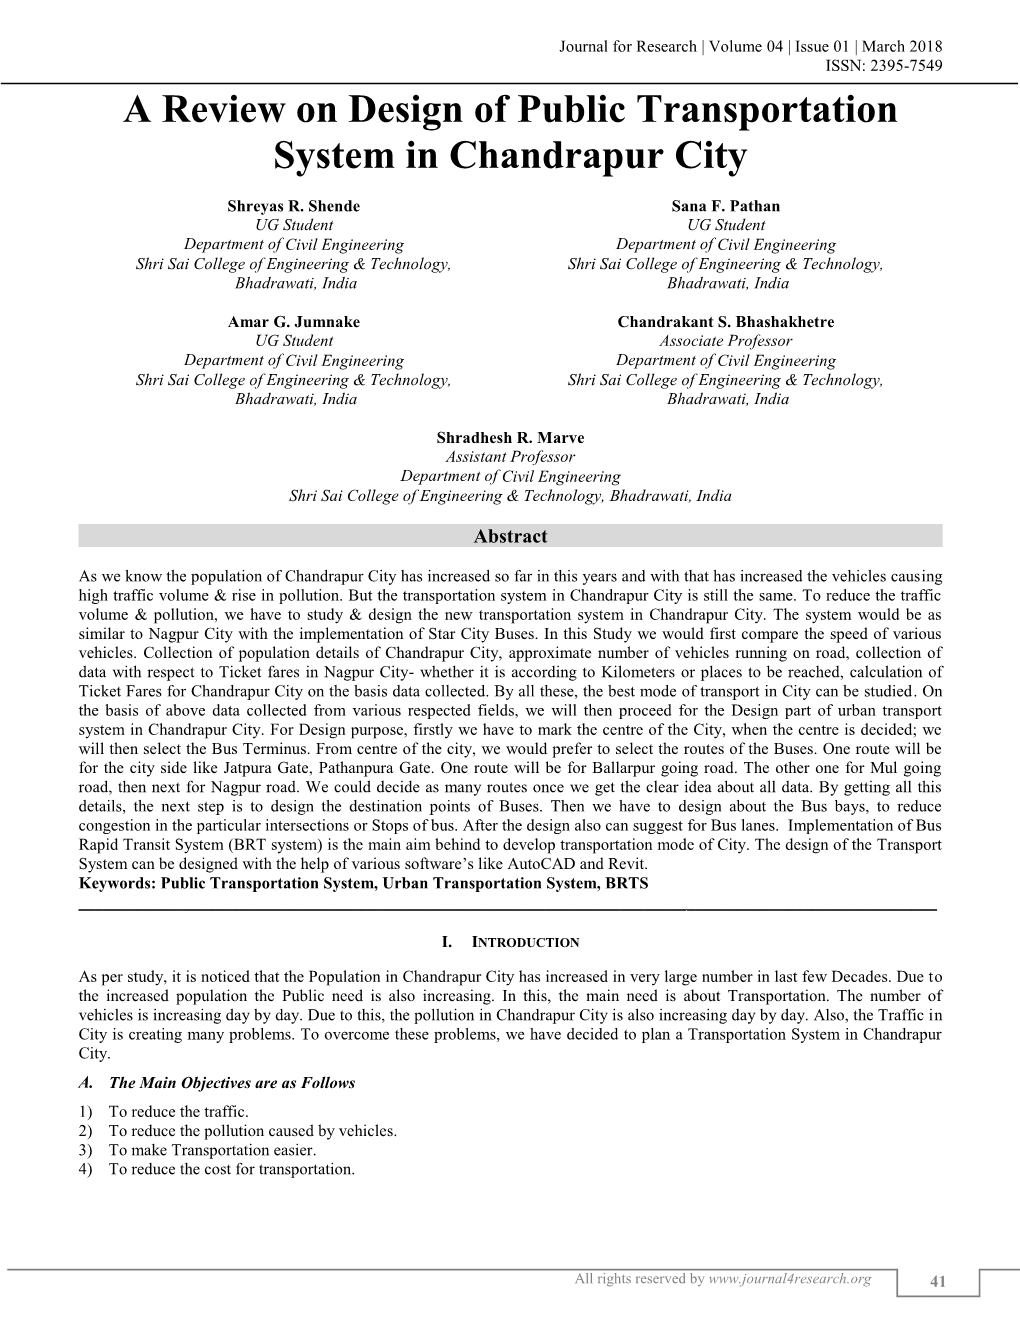 A Review on Design of Public Transportation System in Chandrapur City (J4R/ Volume 04 / Issue 01 / 009)